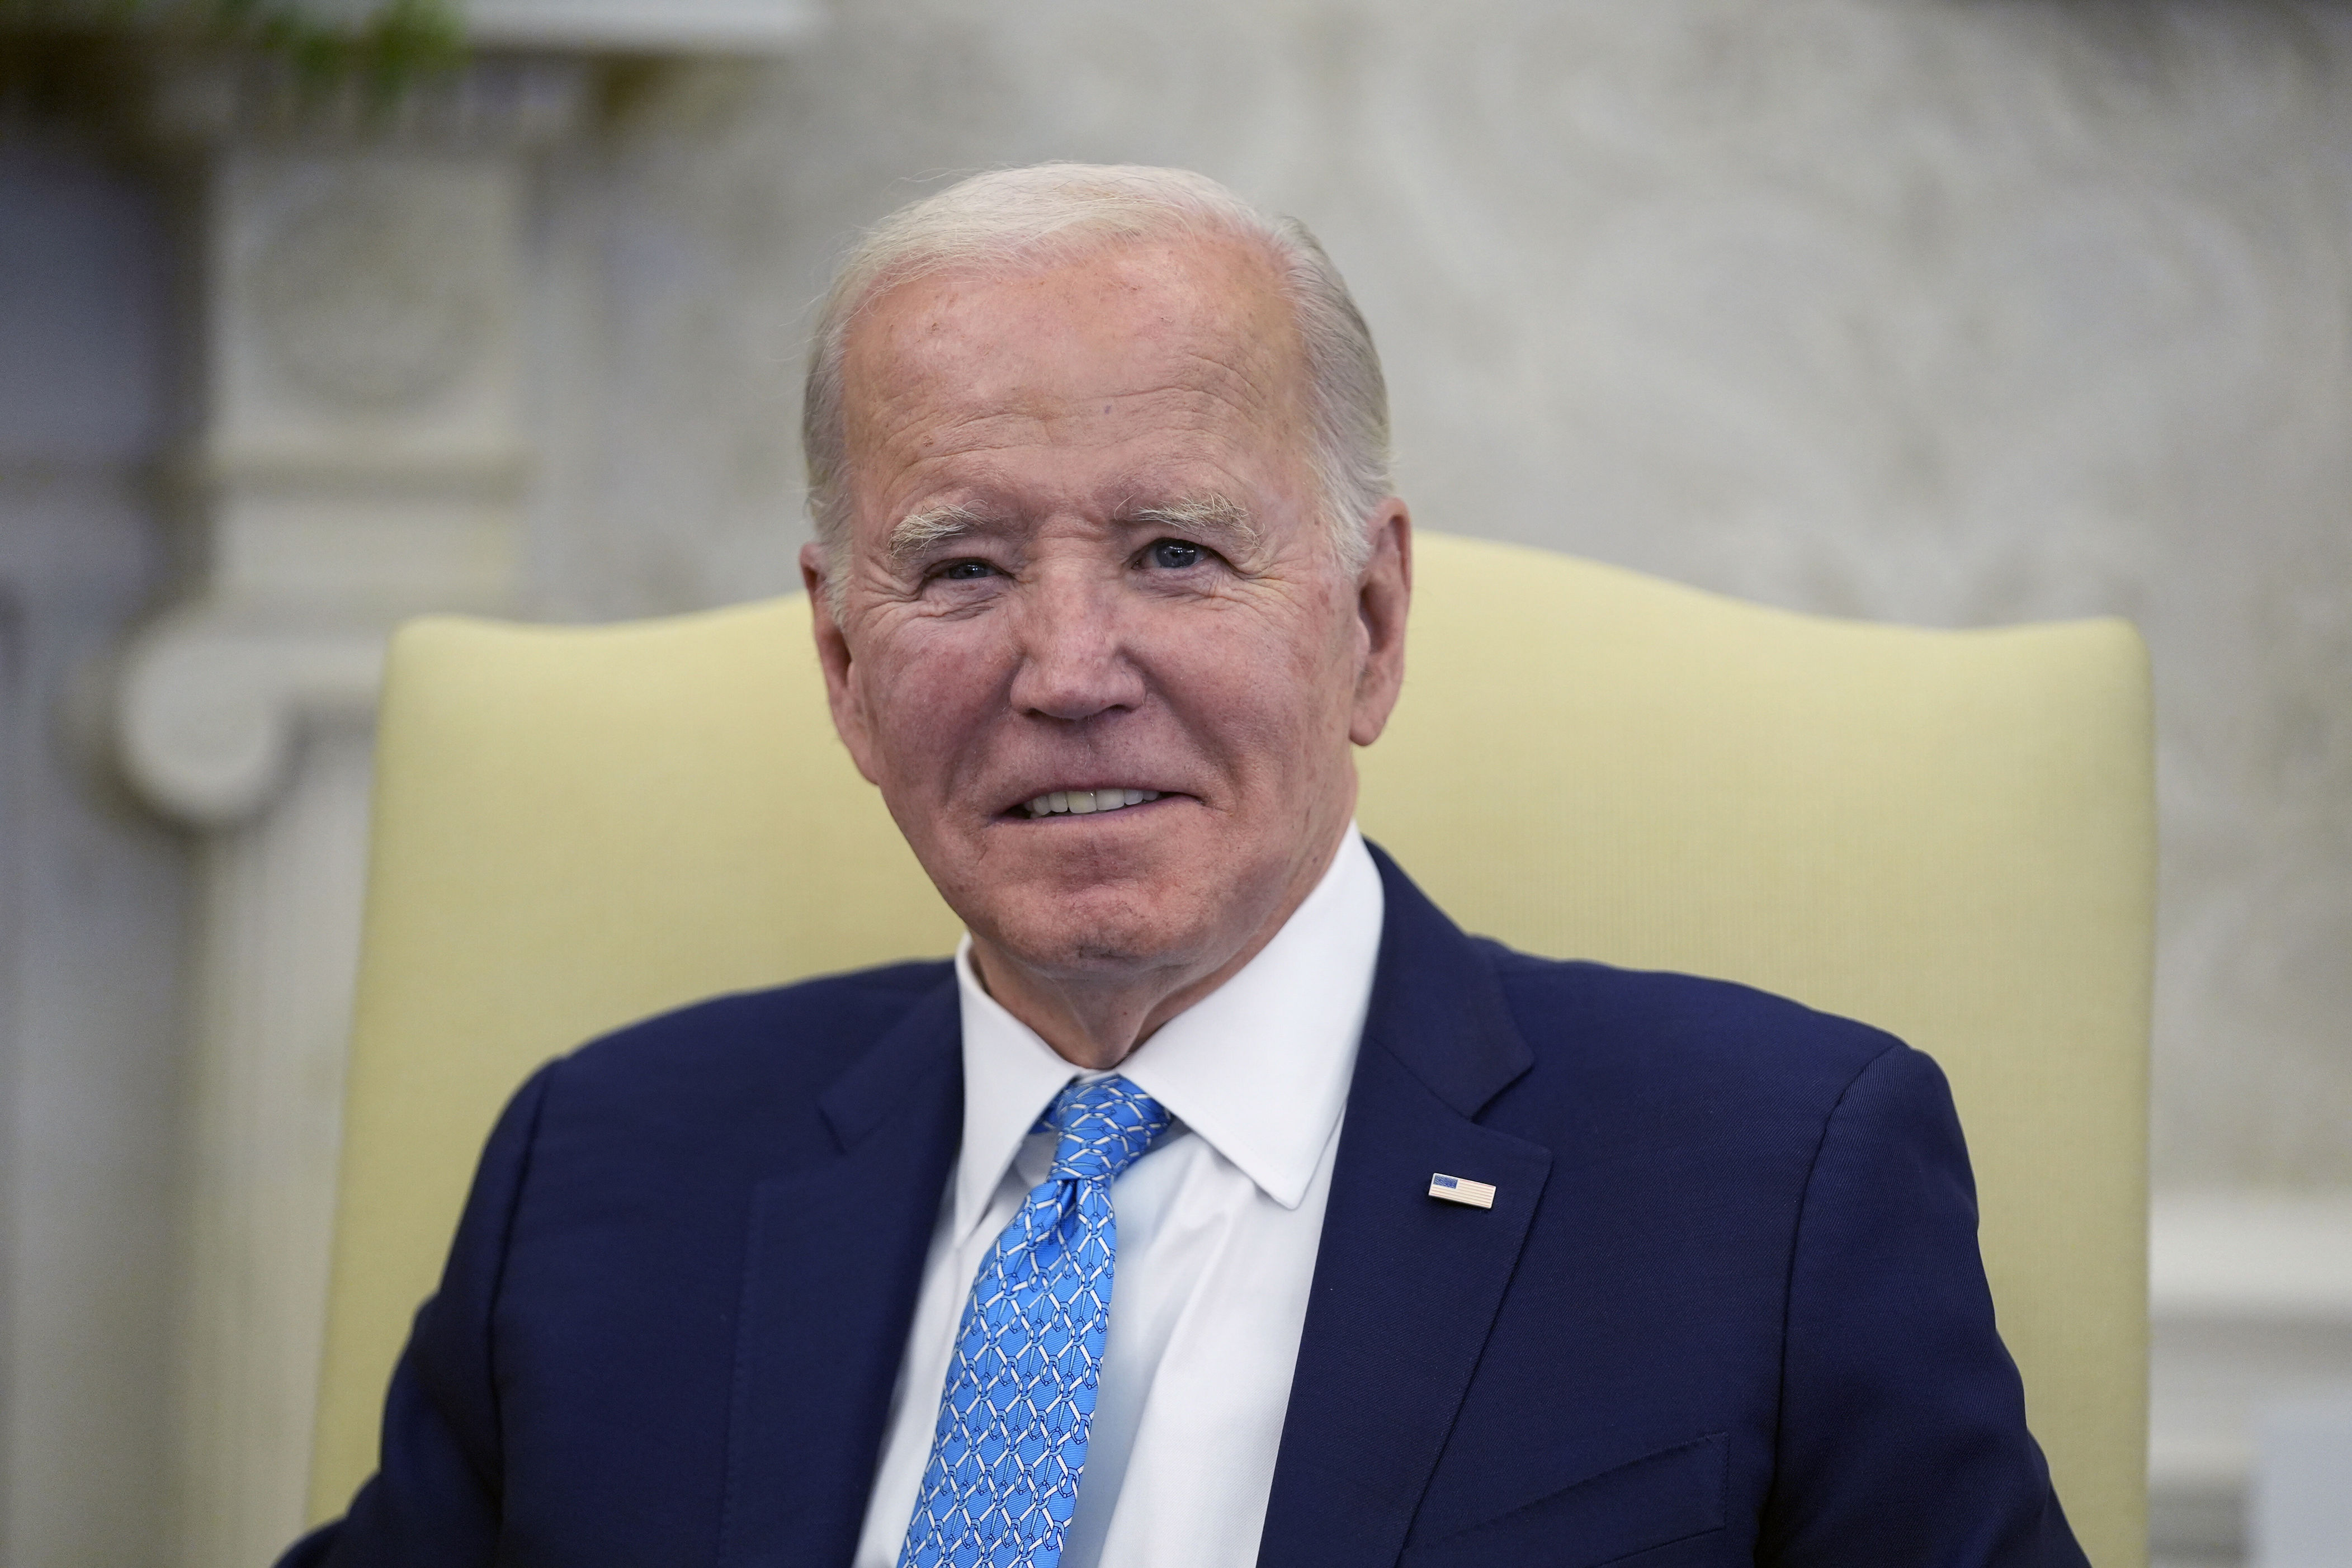 poll: strong disapproval of biden's leadership hits all-time high among voters